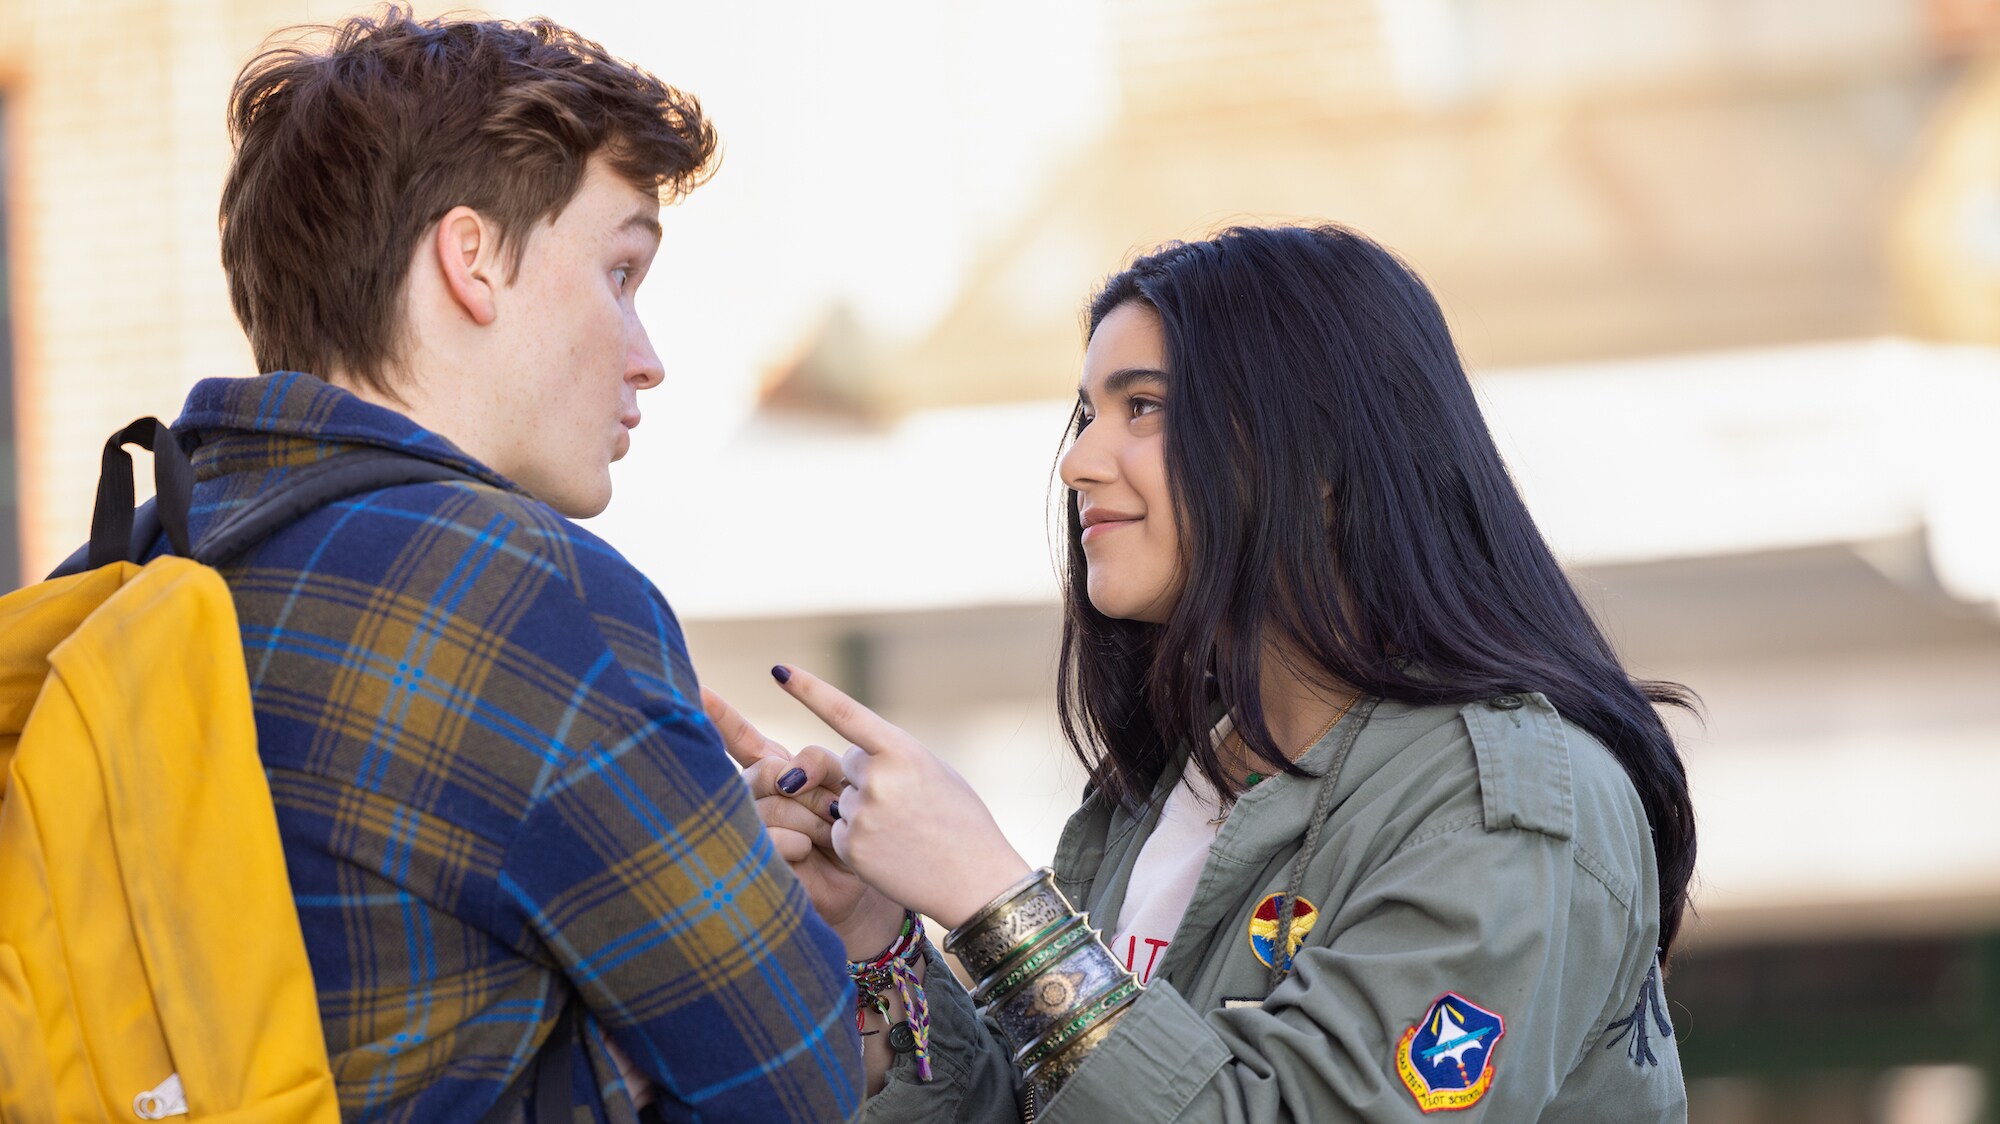 (L-R): Matthew Lintz as Bruno and Iman Vellani as Ms. Marvel/Kamala Khan in Marvel Studios' MS. MARVEL, exclusively on Disney+. Photo by Chuck Zlotnick. ©Marvel Studios 2022. All Rights Reserved.